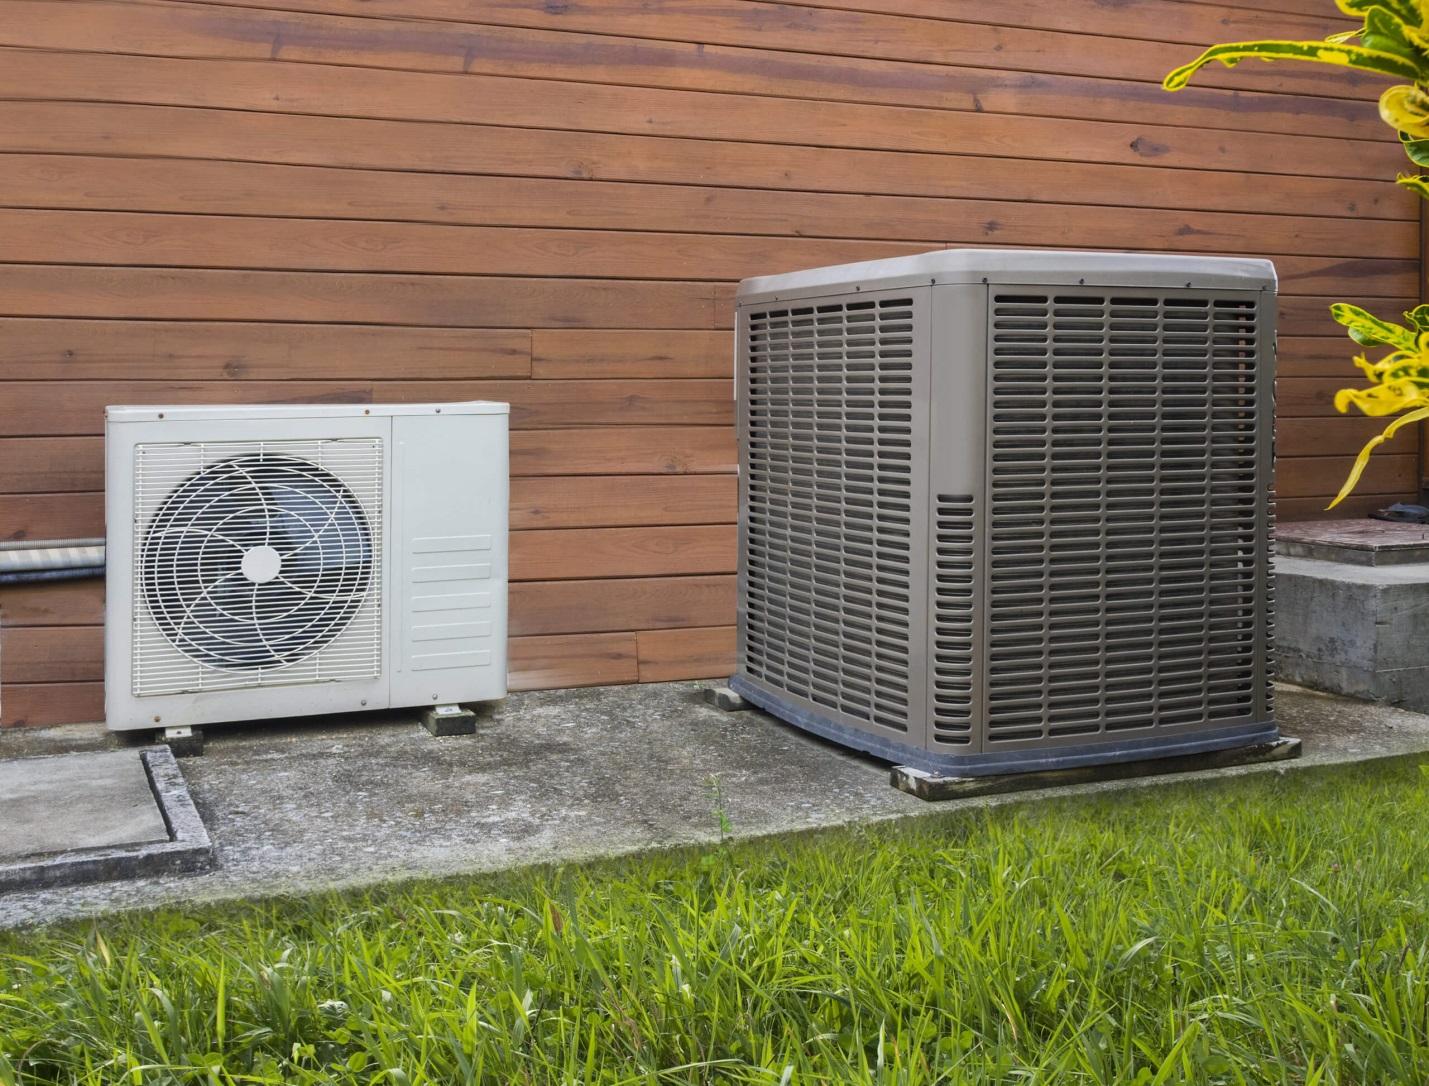 What Are Home Heat Pumps & Should You Get One